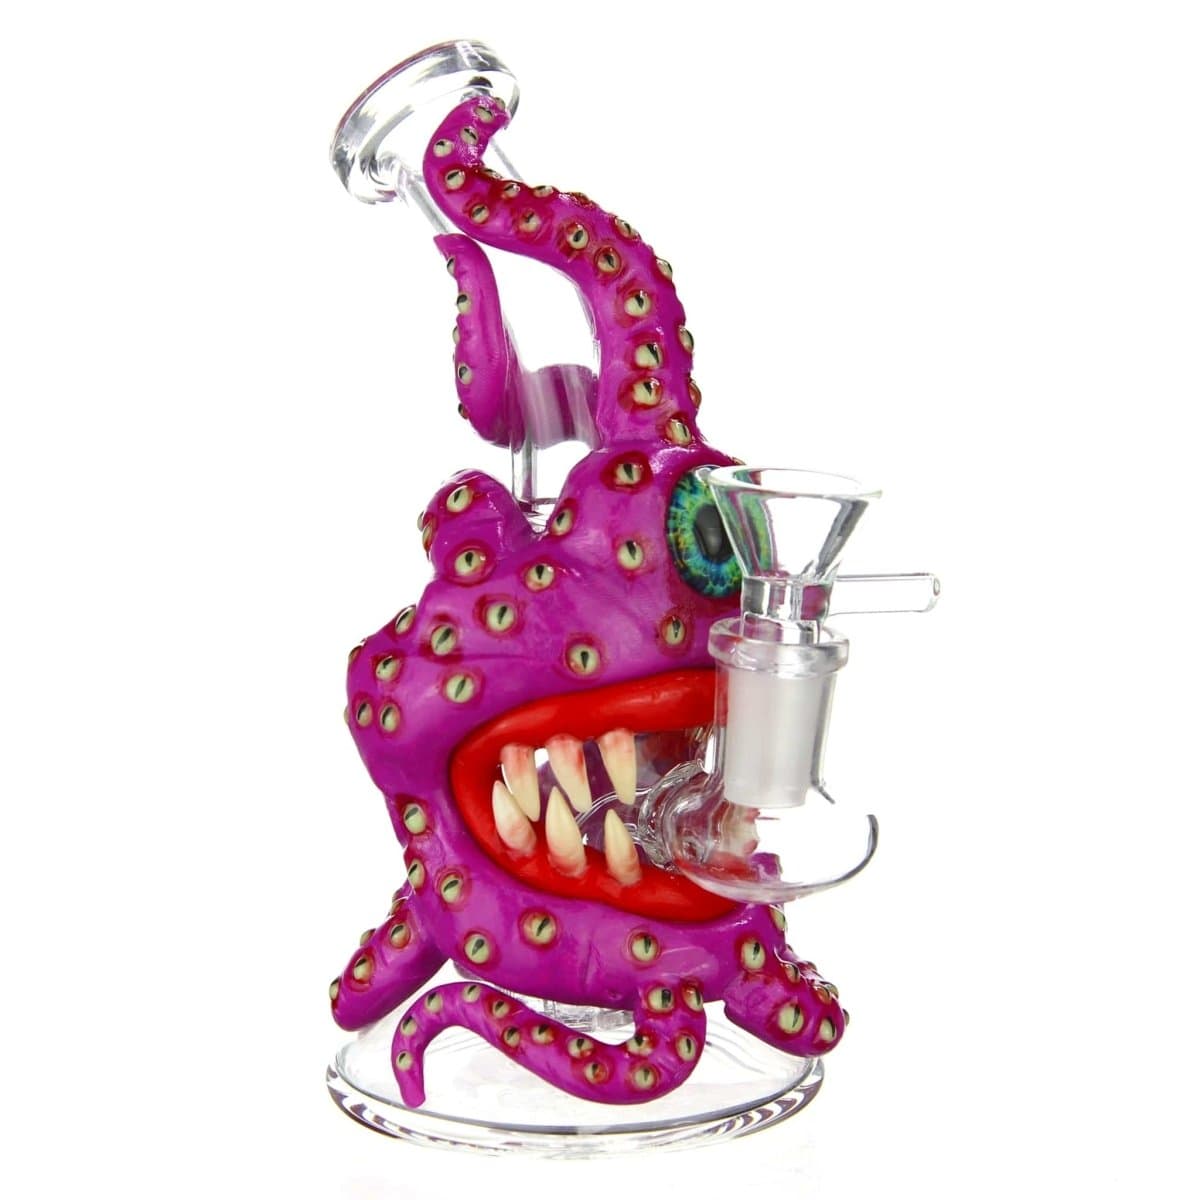 Benext Generation Dab Rig The Kreature Dab Rig